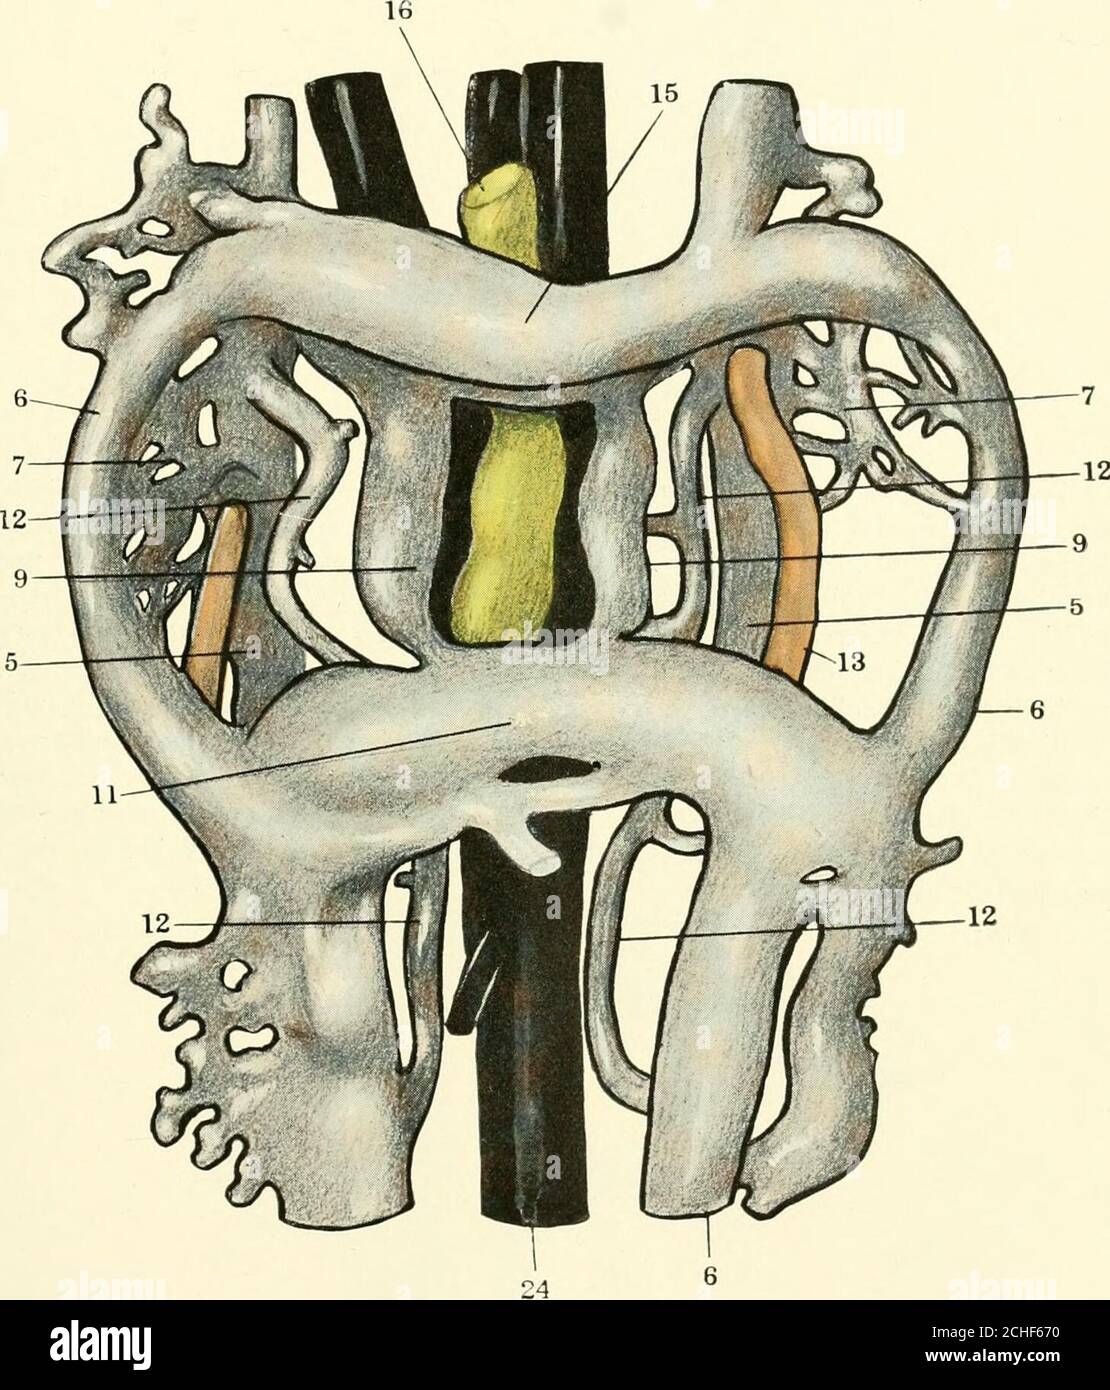 . The American journal of anatomy . 5 229 PLATE 5 EXPLANATION OF FIGURE 6 Reconstruction of a 6 mm. Tragulus embryo. Collection No. 205. X 100.Showing the region of the sub-hepatic sinus in ventral view. 5, post-cardinalvein; 6, umbilical vein; 7, umbilico-post-cardinal plexus; 9, omphalo-mesentericvein; 11, sub-hepatic sinus; 12, sub-cardinal vein; 13, Wolffian duct; 15, Sinusvenosus; 16, intestine; 24, aorta. 230 VEINS AND LYMPHATICS IN TRAGULUS FREDERICK TILNEY PLATE 5. 231 PLATE 6 EXPLANATION OF FIGURE 7 Reconstruction of a 20 mm. Tragulus embryo. Collection No. 202. X 100.Showing the axia Stock Photo